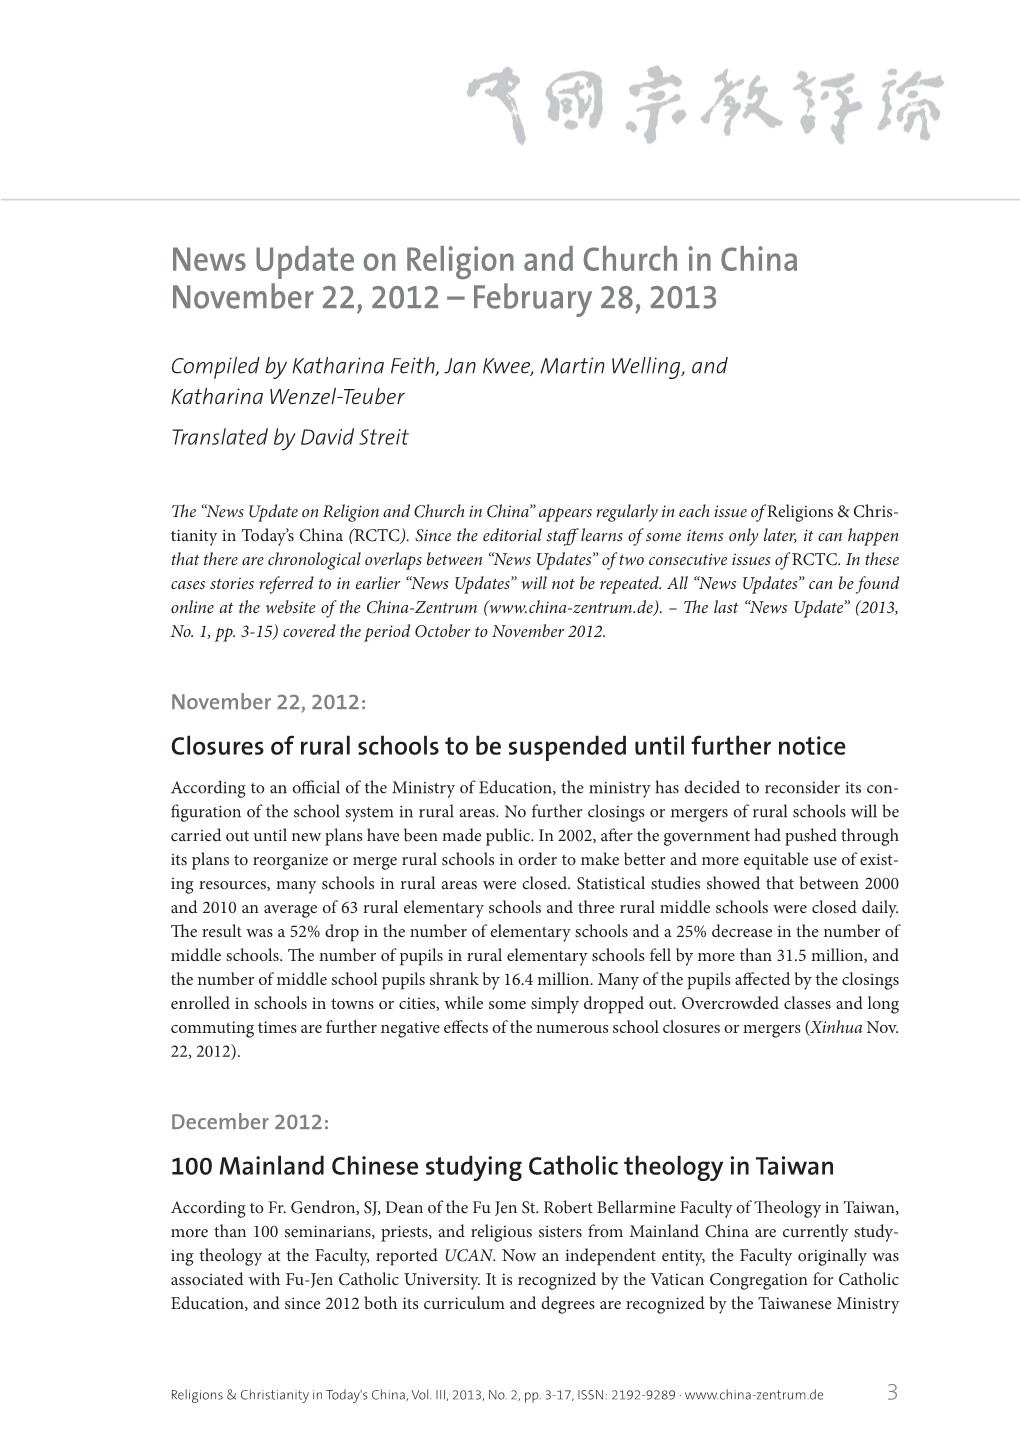 News Update on Religion and Church in China November 22, 2012 – February 28, 2013